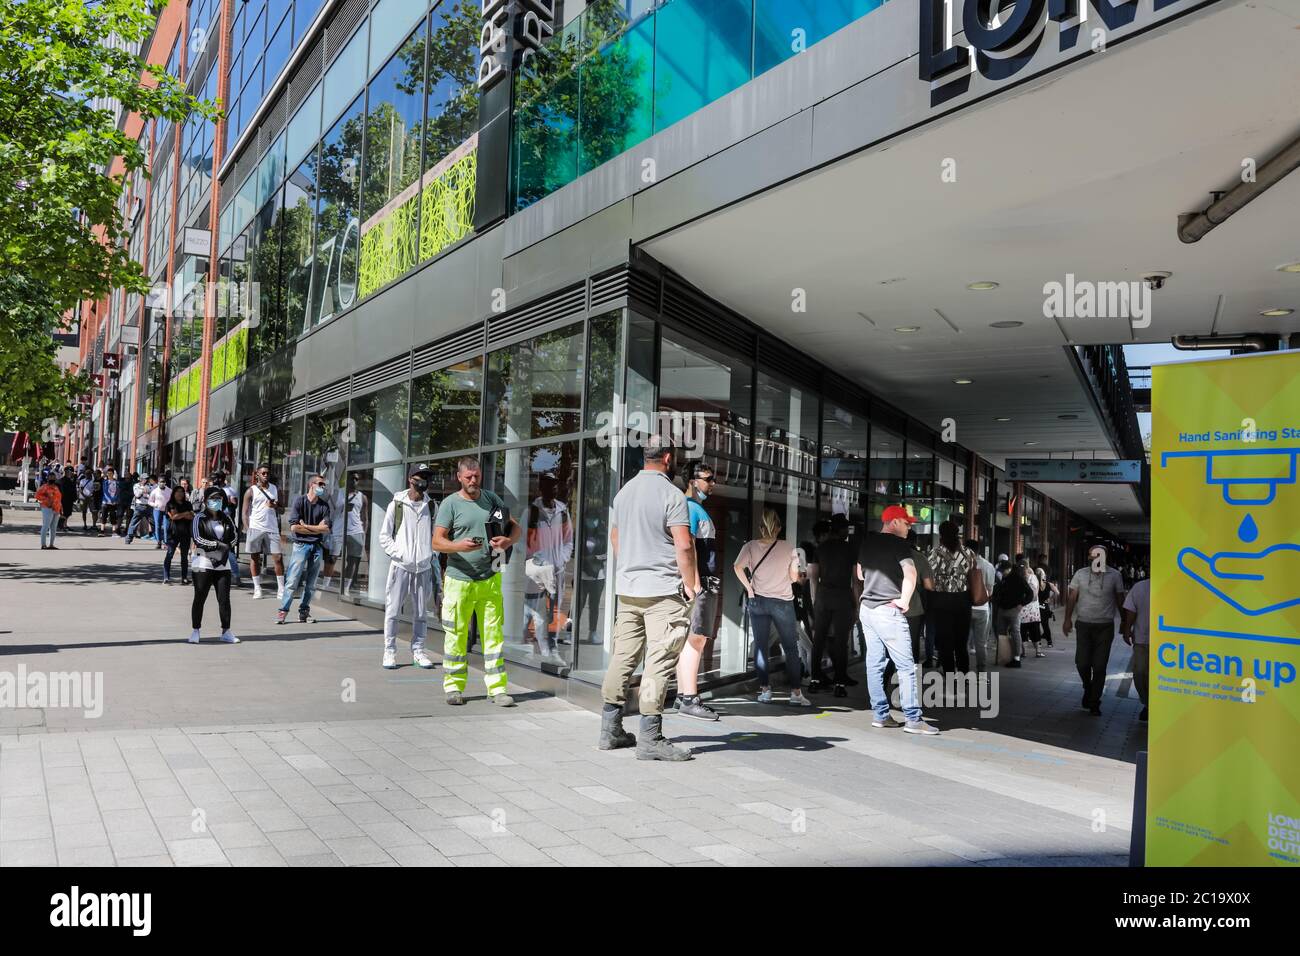 Wembley Park, London, UK. 15th June 2020. Shoppers queue outside the Nike  Store in the London Designer Outlet using the socially distanced 2 metre  markings. Coronavirus Covid-19 lockdown restrictions allow non essential